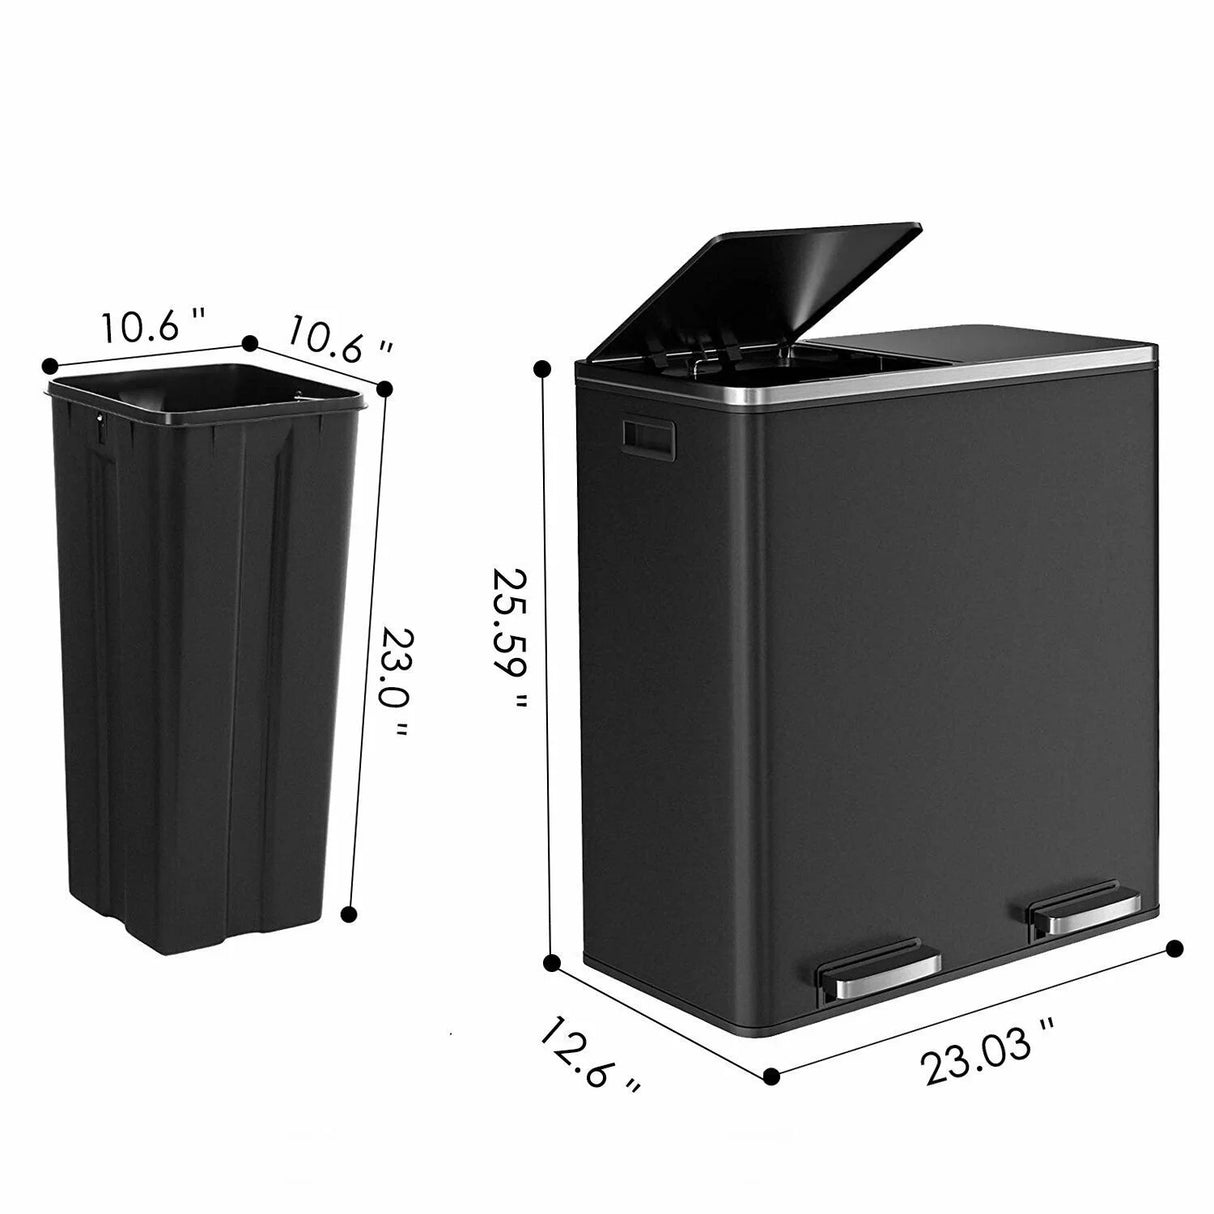 Arlopu 60 L/16 Gal Dual Trash Can, Stainless Steel Garbage Can for Kitchen, Recycle Bin with Lid